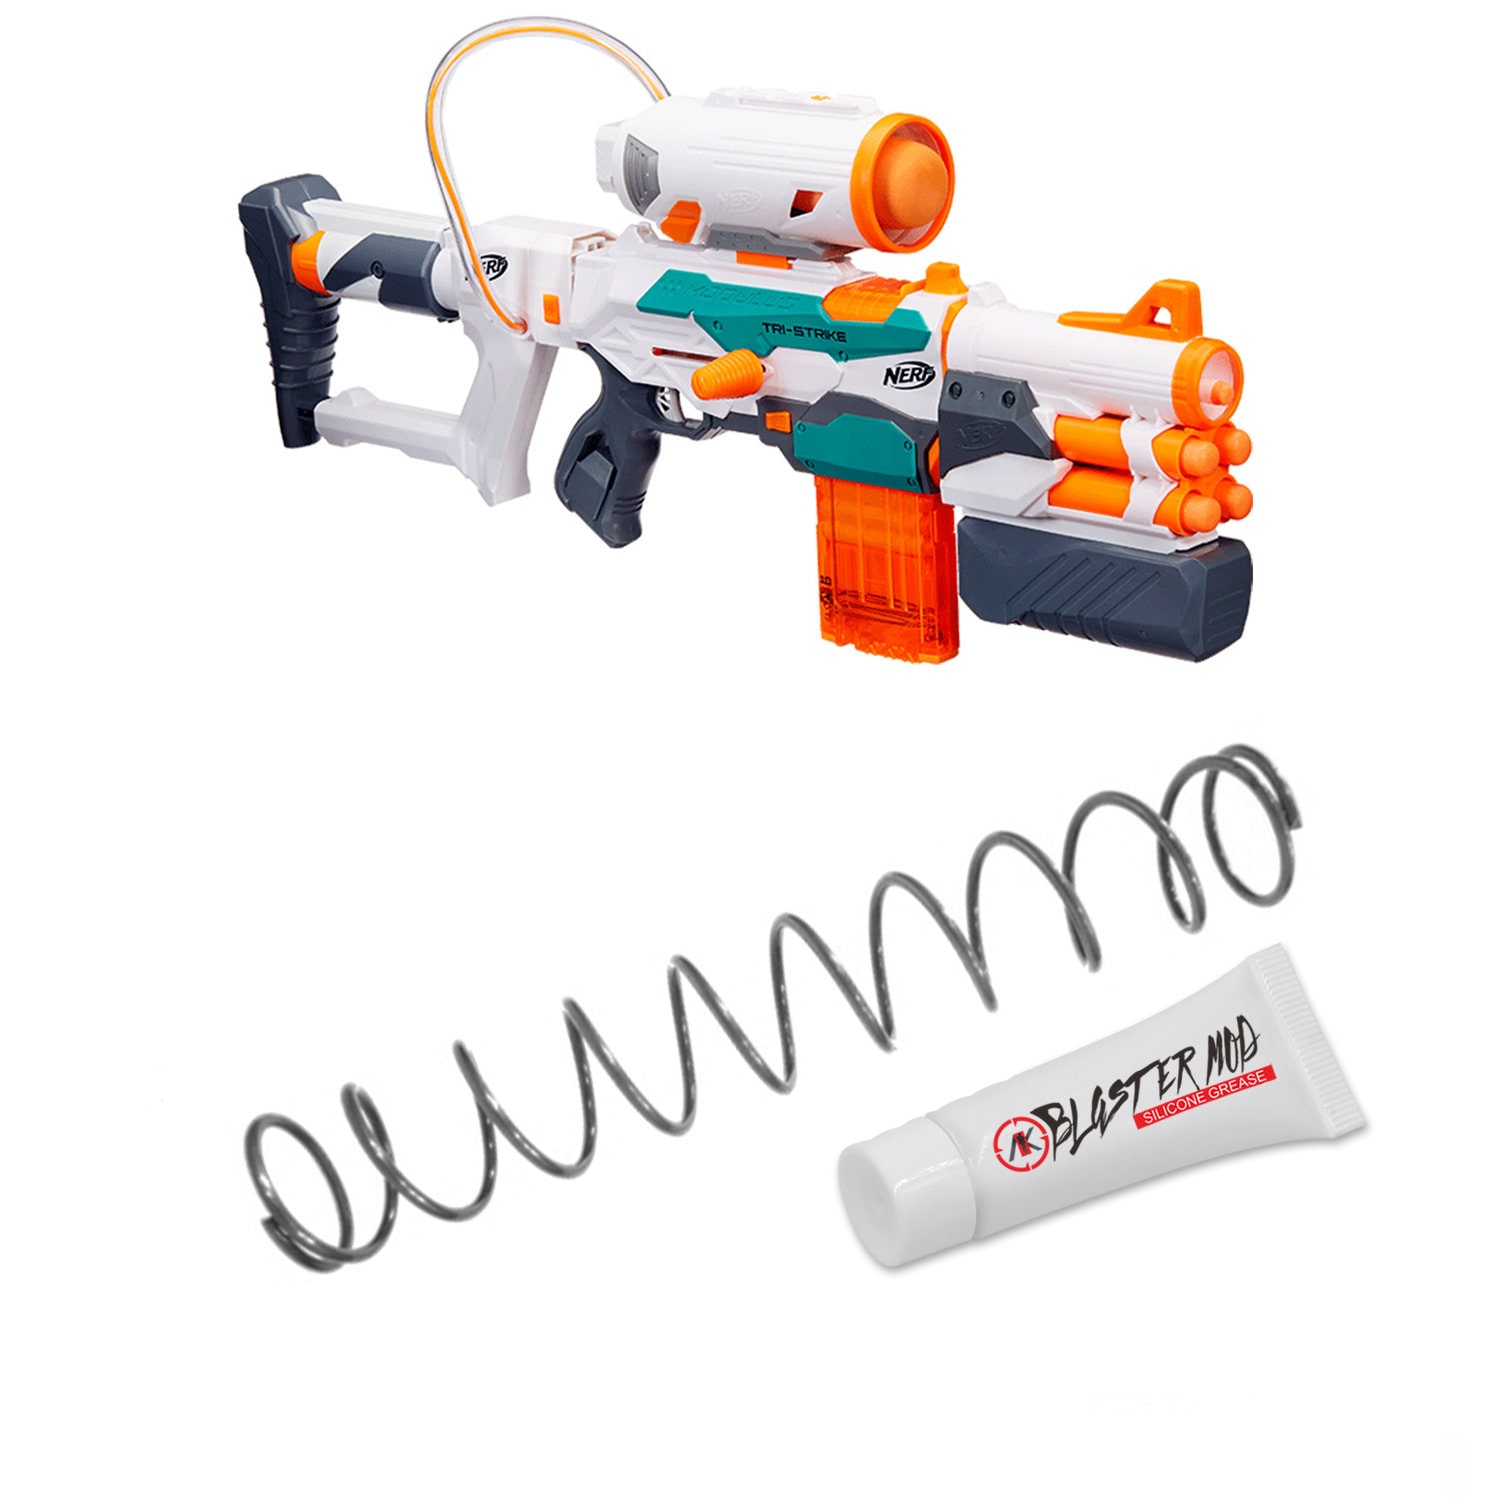 Nerf products are up to 67% off right in time for spring break fun